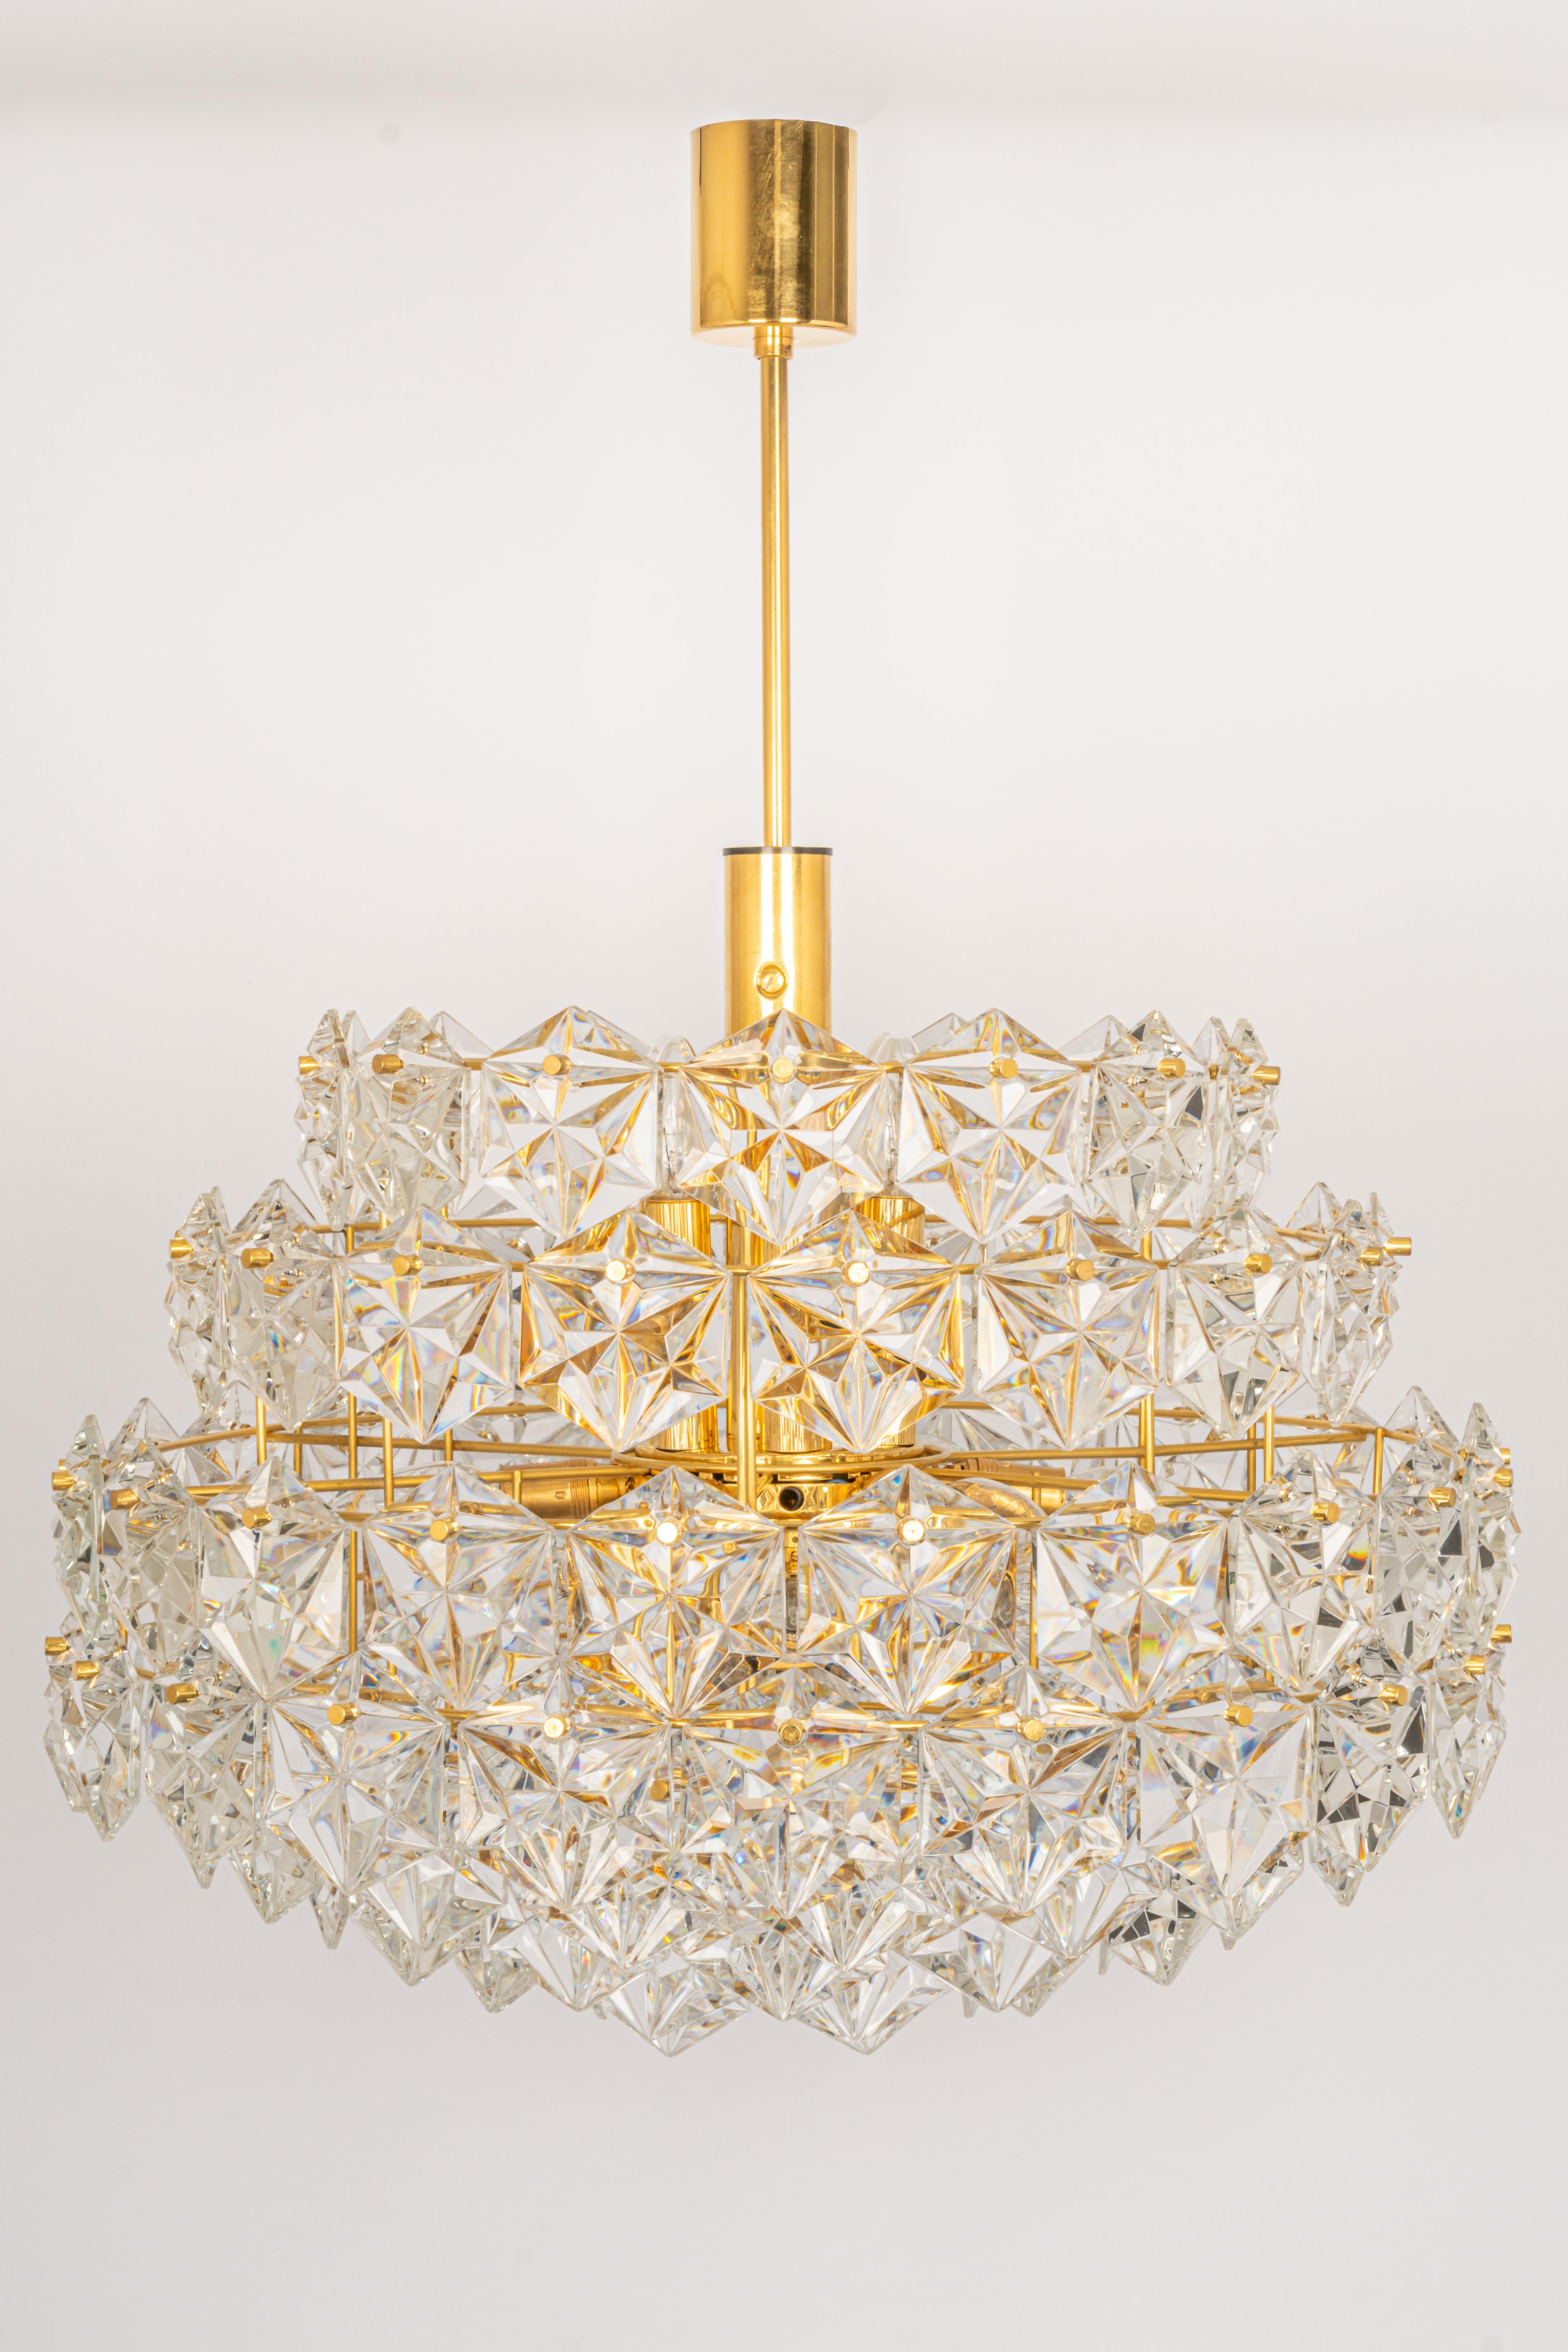 A stunning eight-tier chandelier by Kinkeldey, Germany, was manufactured in circa 1970-1979. A handmade and high-quality piece. The ceiling fixture and the frame are made of brass and have eight rings with lots of facetted crystal glass